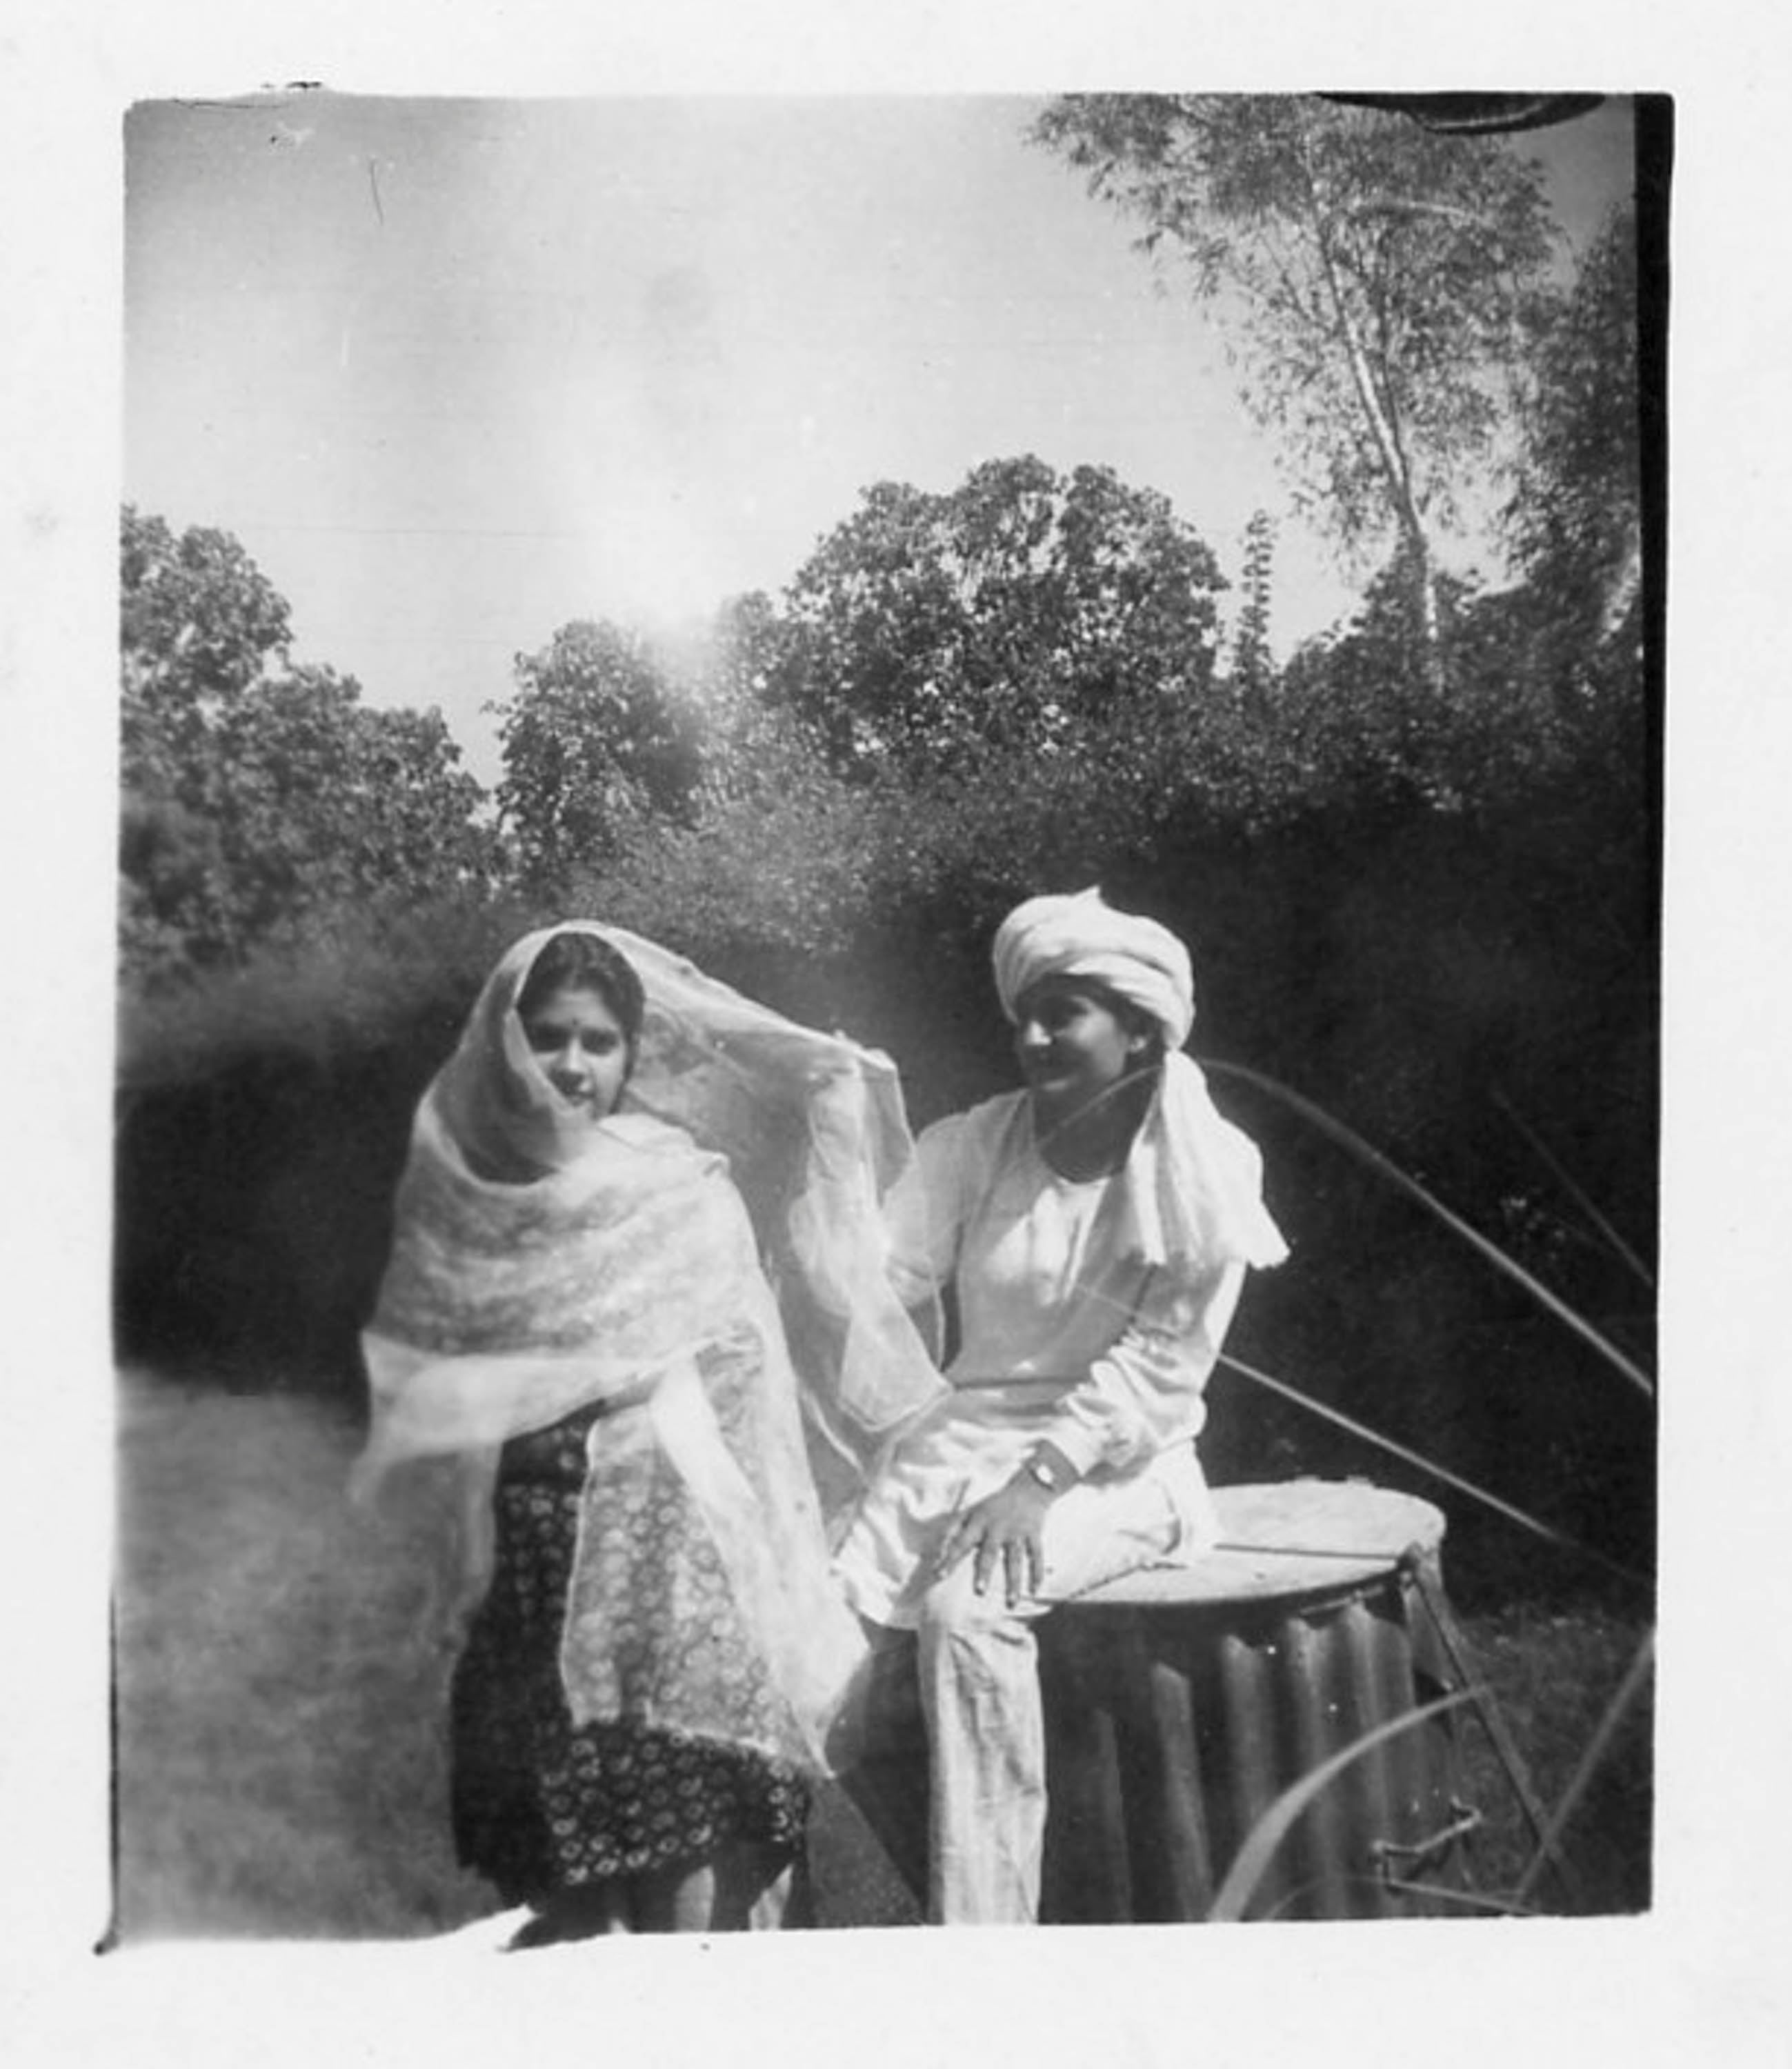 A black and white photograph of a young woman and man, wearing traditional dress in an Indian garden.